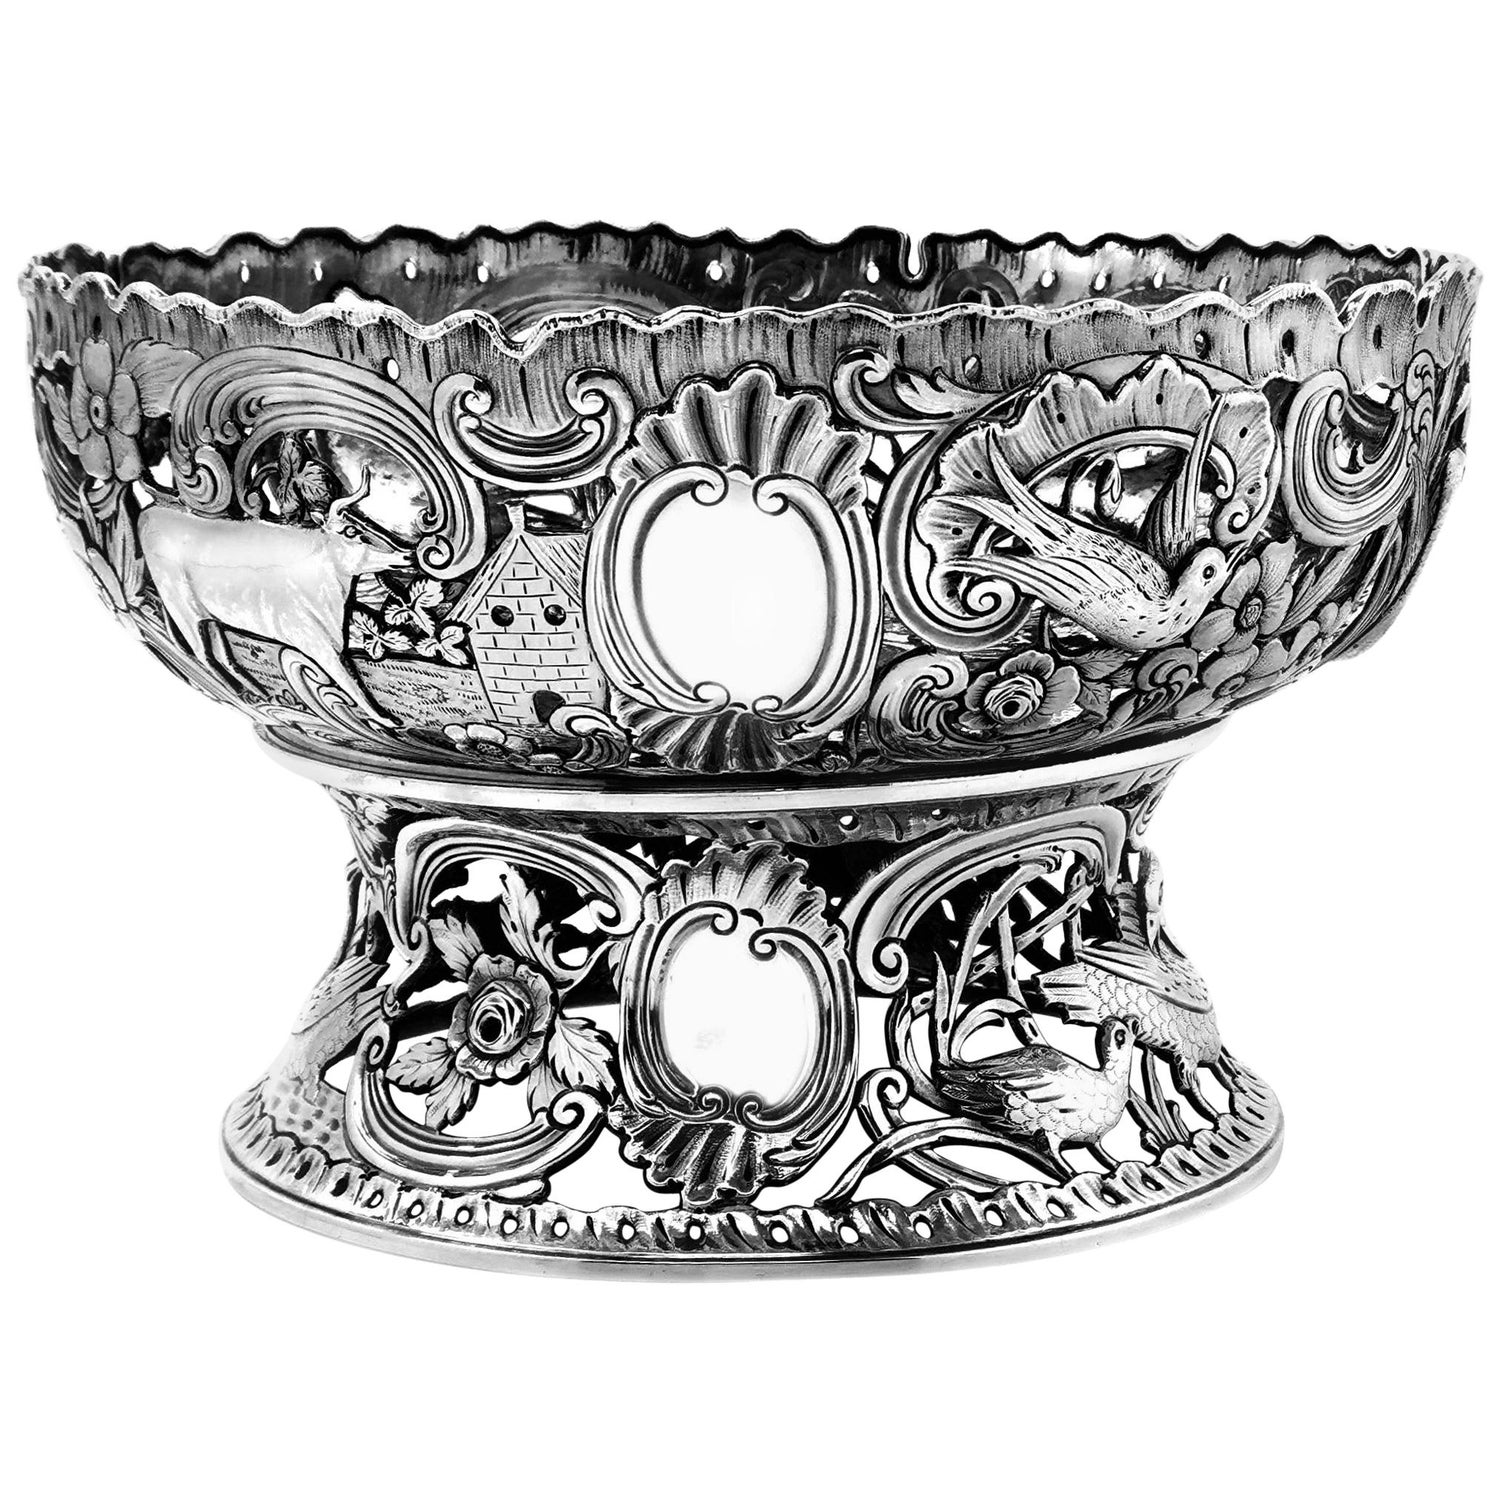 Large Antique Victorian Silver Dish Ring and Bowl 1900 Georgian Irish Style